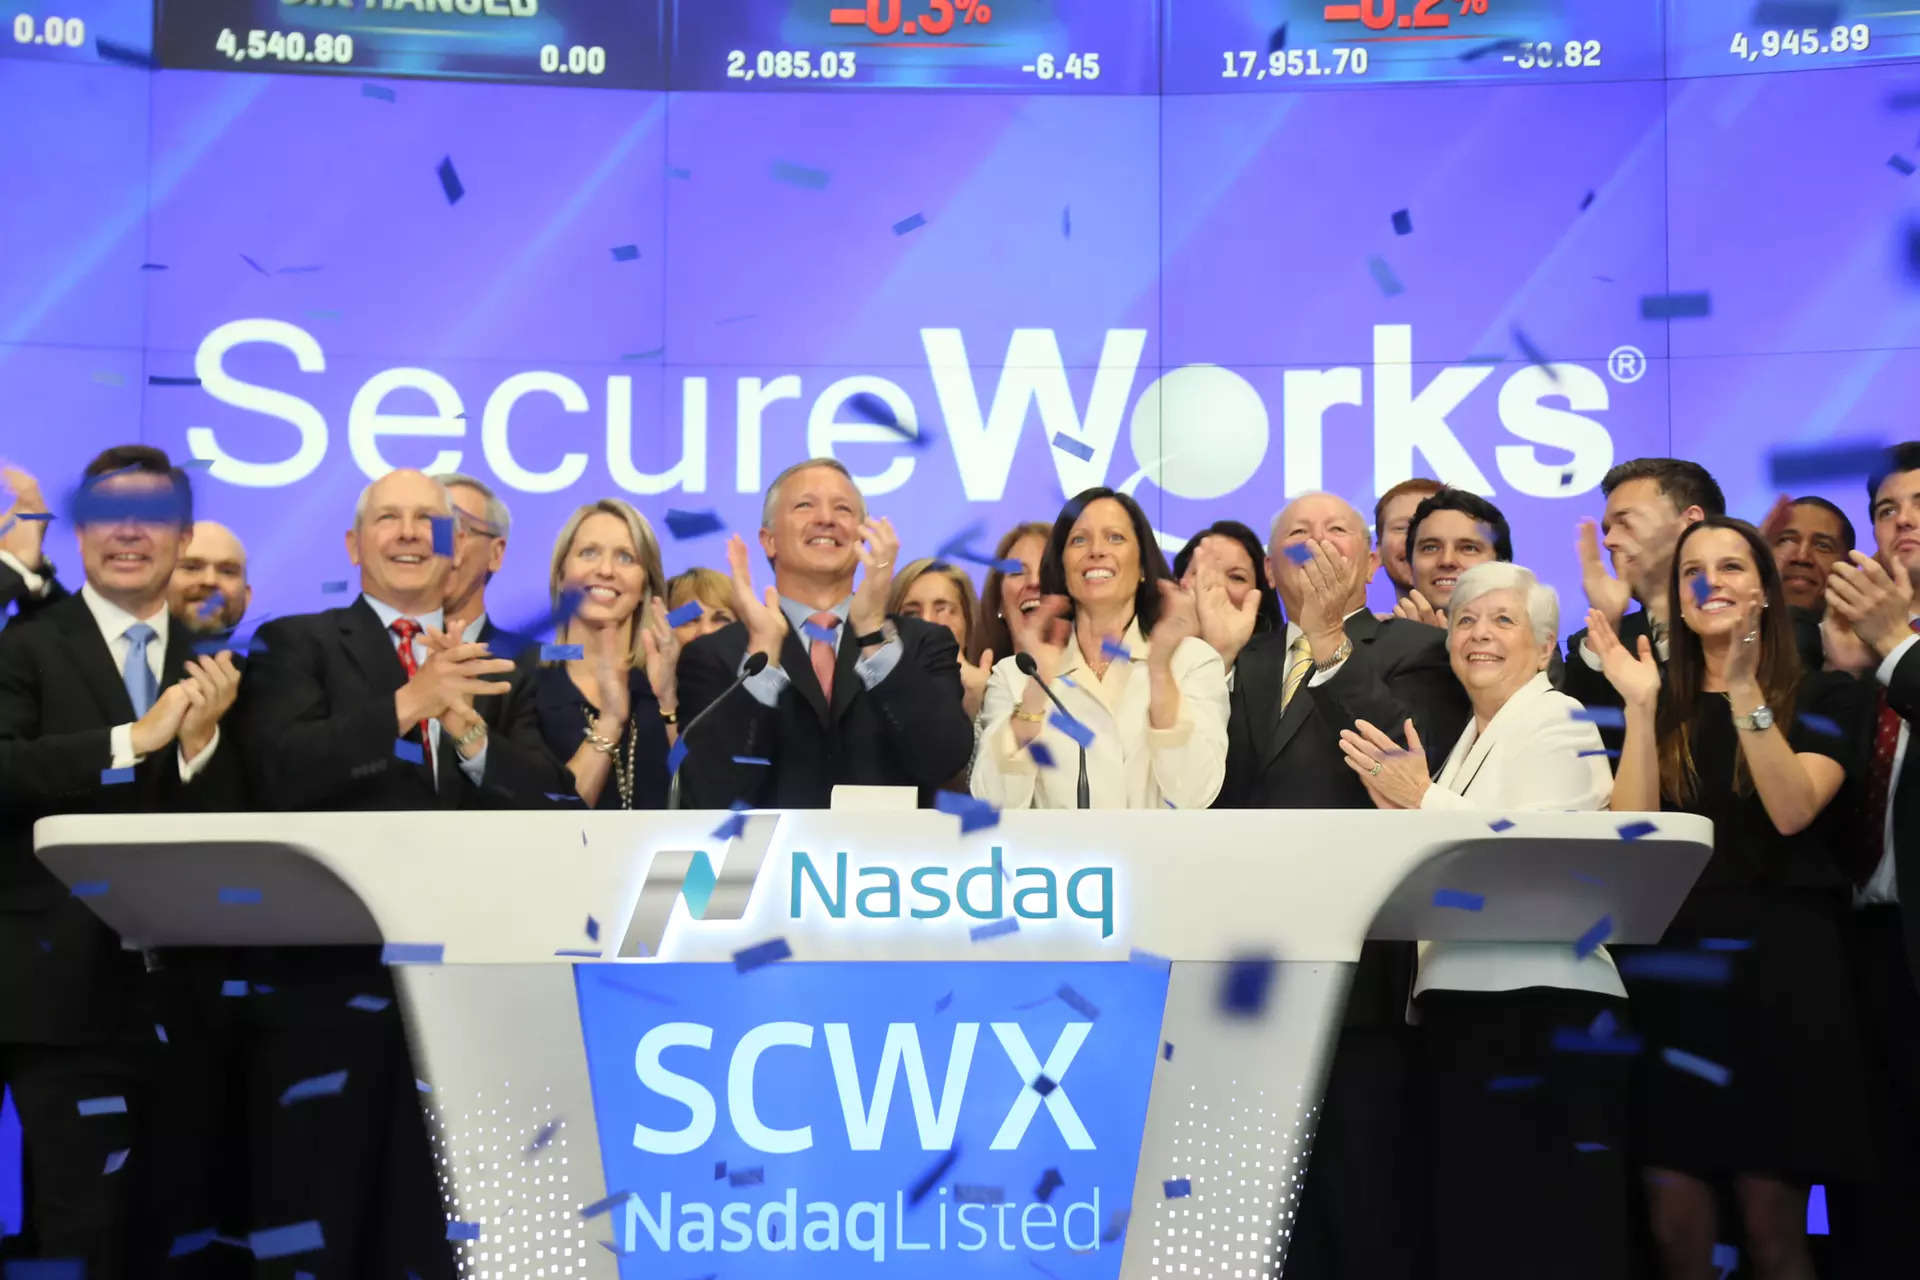 <p>San Francisco, Aug 15 (IANS) Cyber-security company SecureWorks has announced to lay off 15 per cent of its workforce, in its second round of job cuts this year.</p>